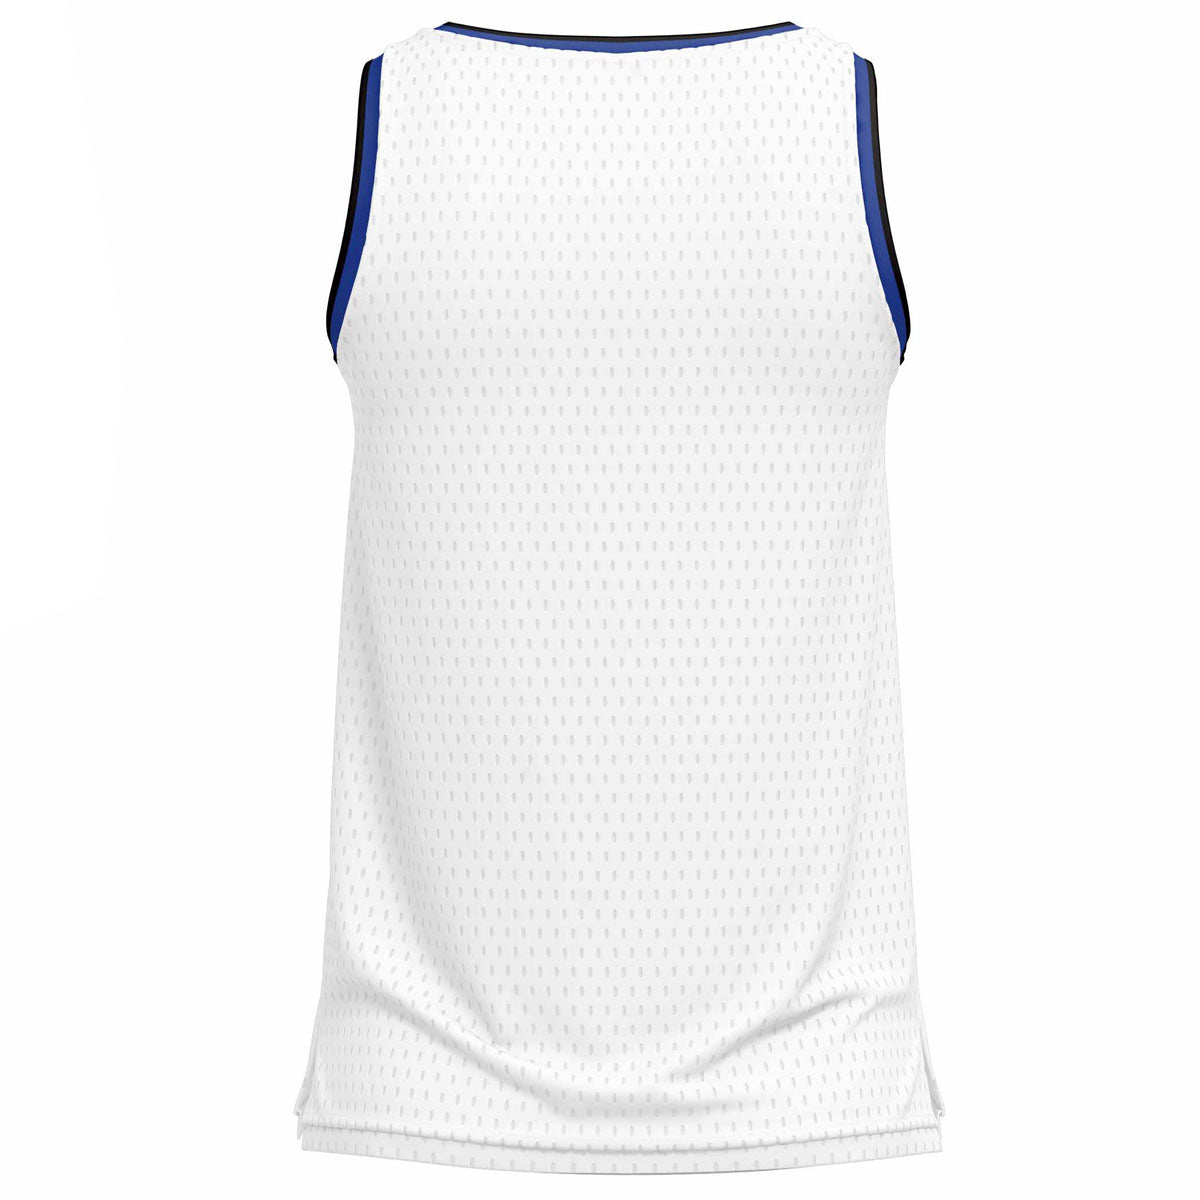 Mc Keever Tyrone Towers Basketball Team Vest - Adult - White